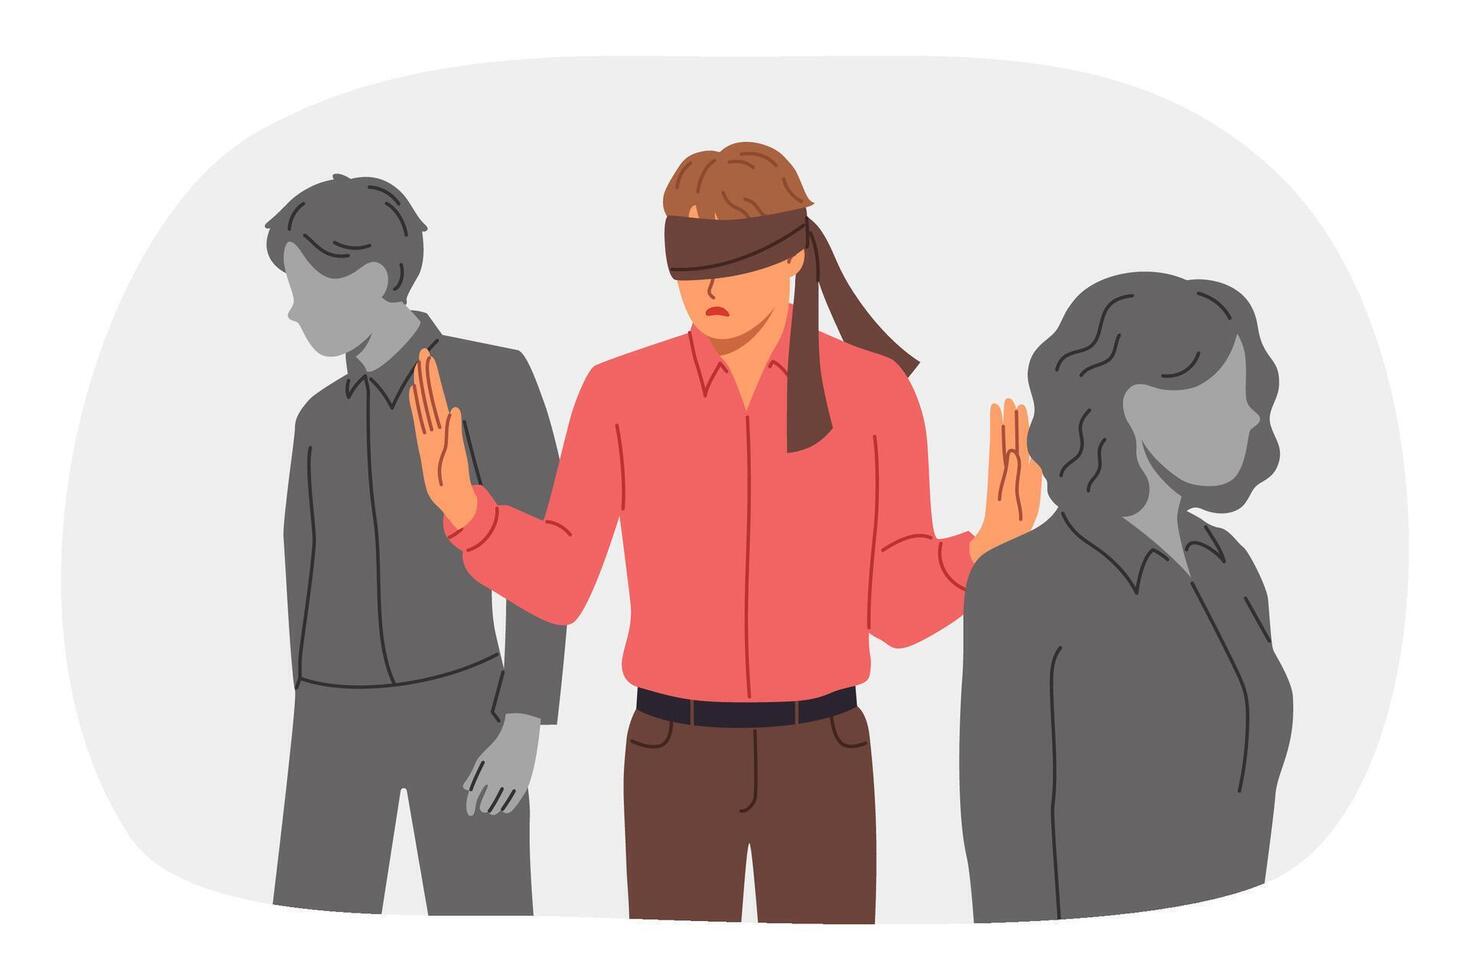 Blindfolded man wanders among colleagues, feeling insecure due to lack of professional qualifications. Blindfolded guy stands out from crowd needs help regaining spatial orientation. vector